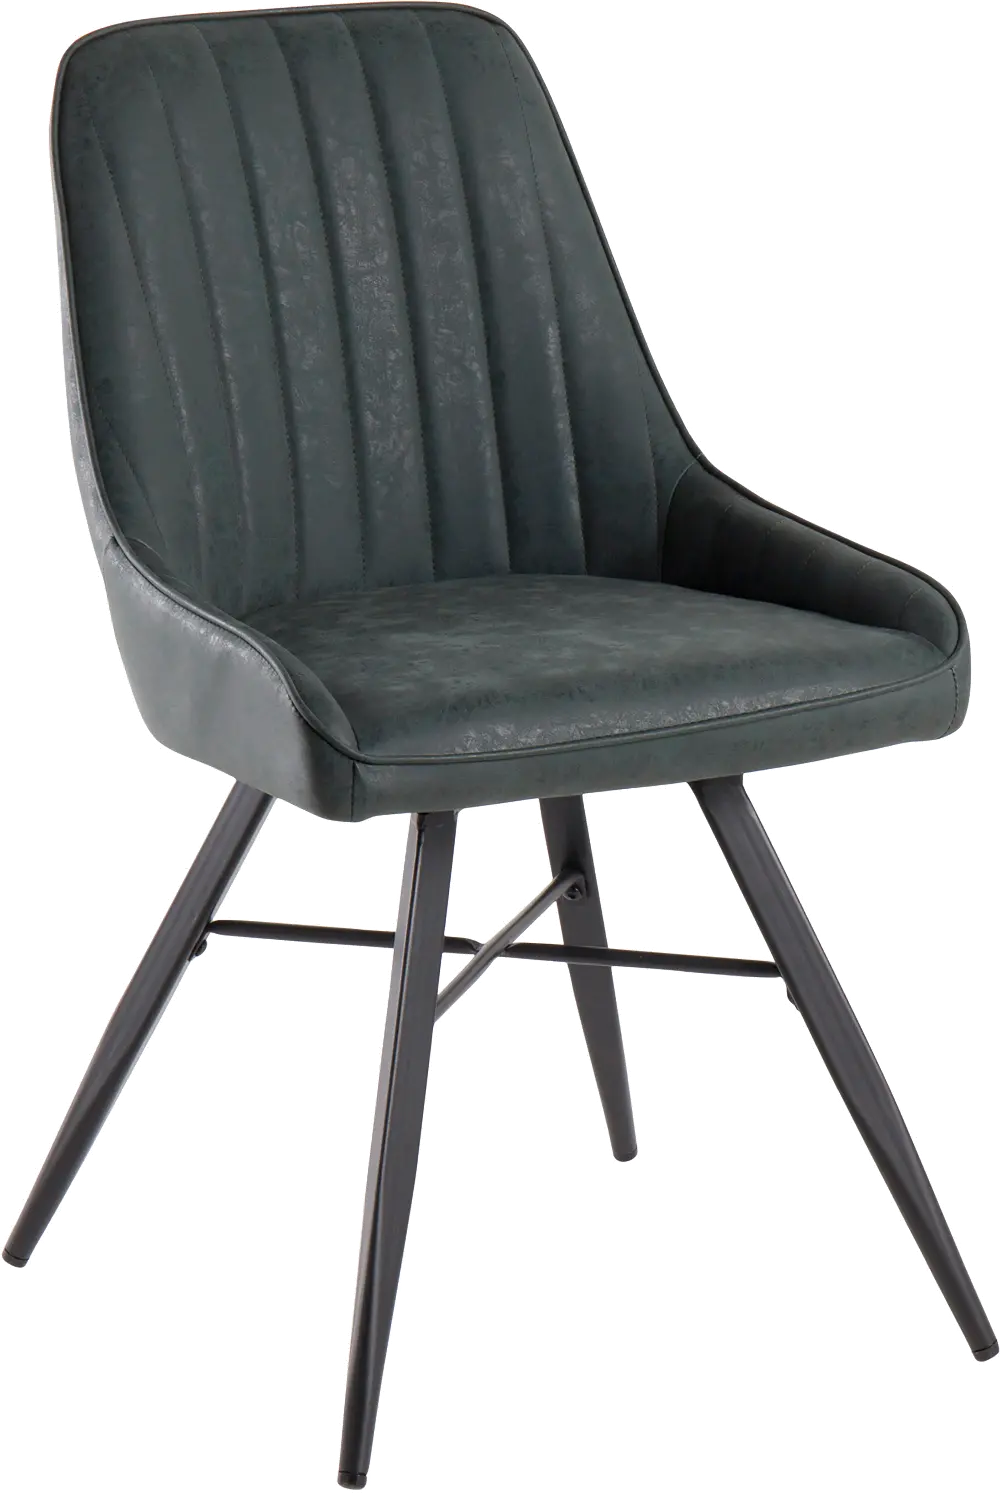 CH-CAVLER BKGN Cavalier Gray Green Faux Leather Swiveling Chair-1